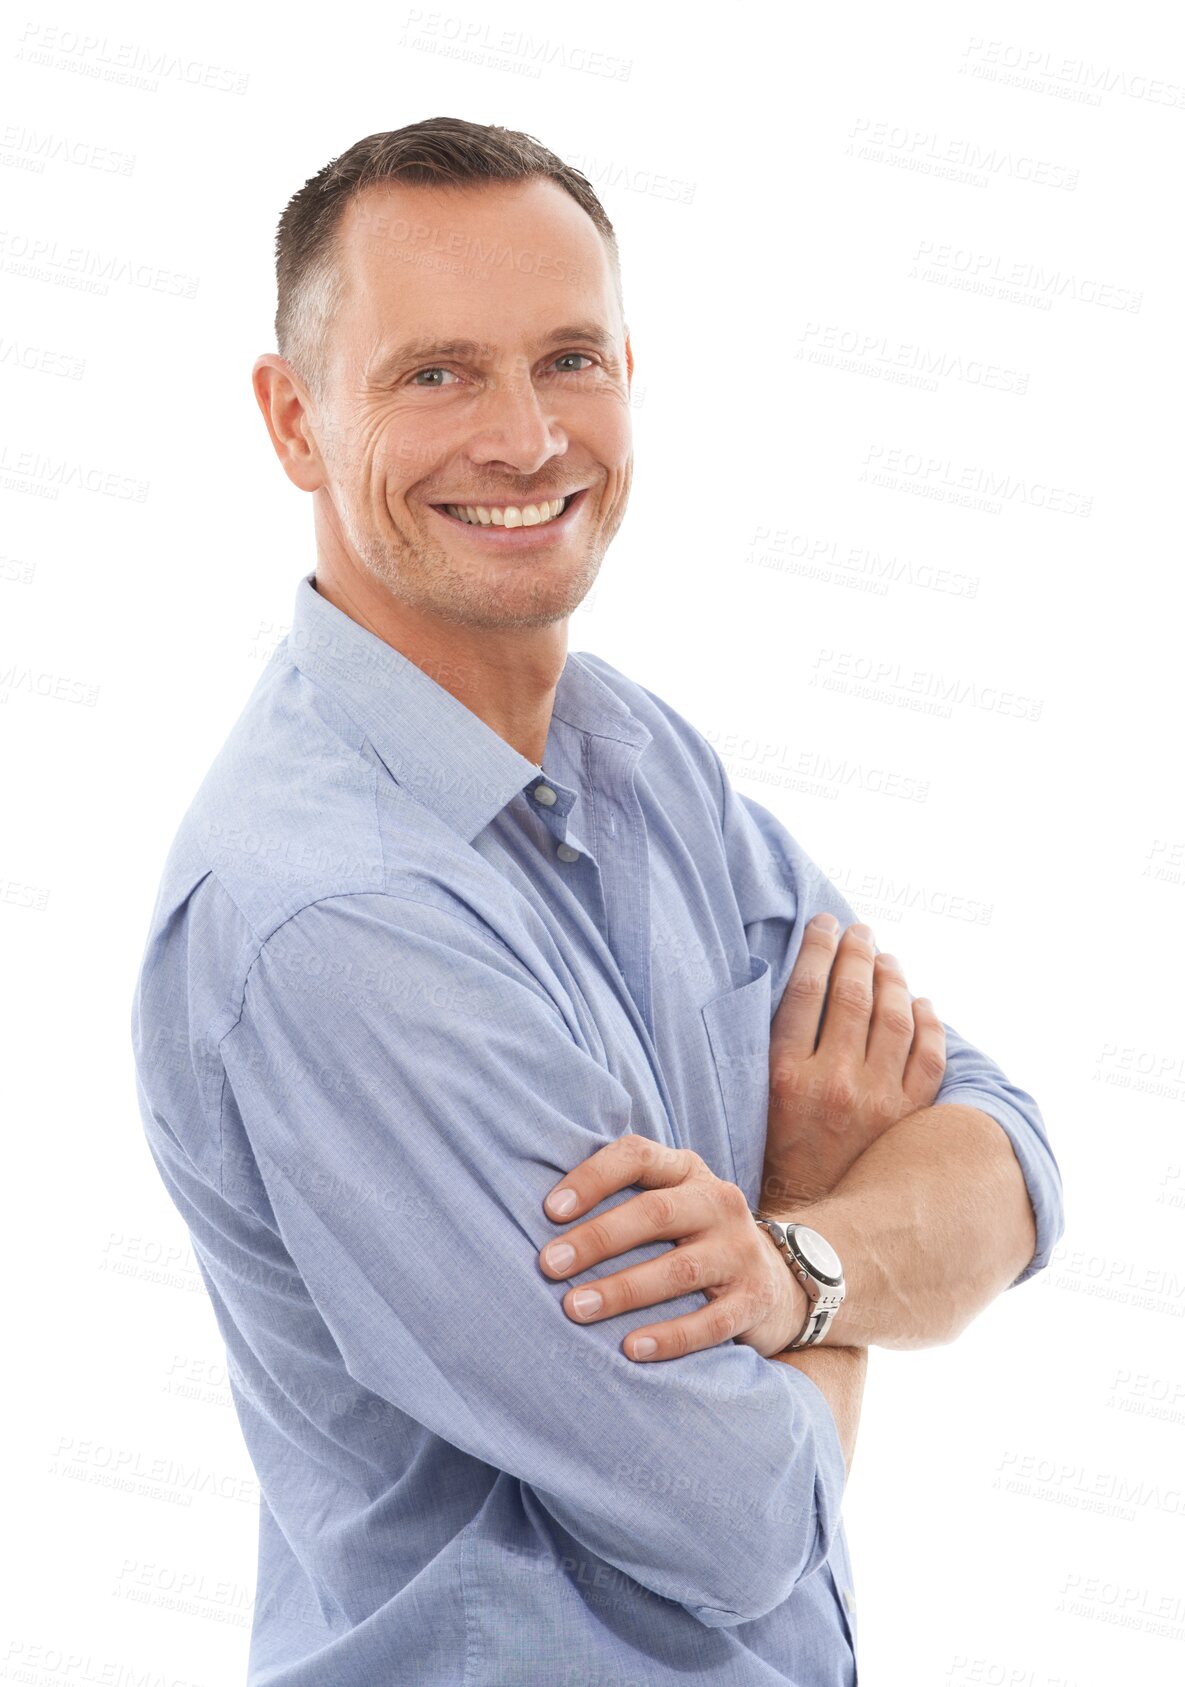 Buy stock photo Arms crossed, pride and portrait of man with confidence, happiness and smile. Confident, executive and mature person with positivity, work motivation and happy isolated on transparent png background